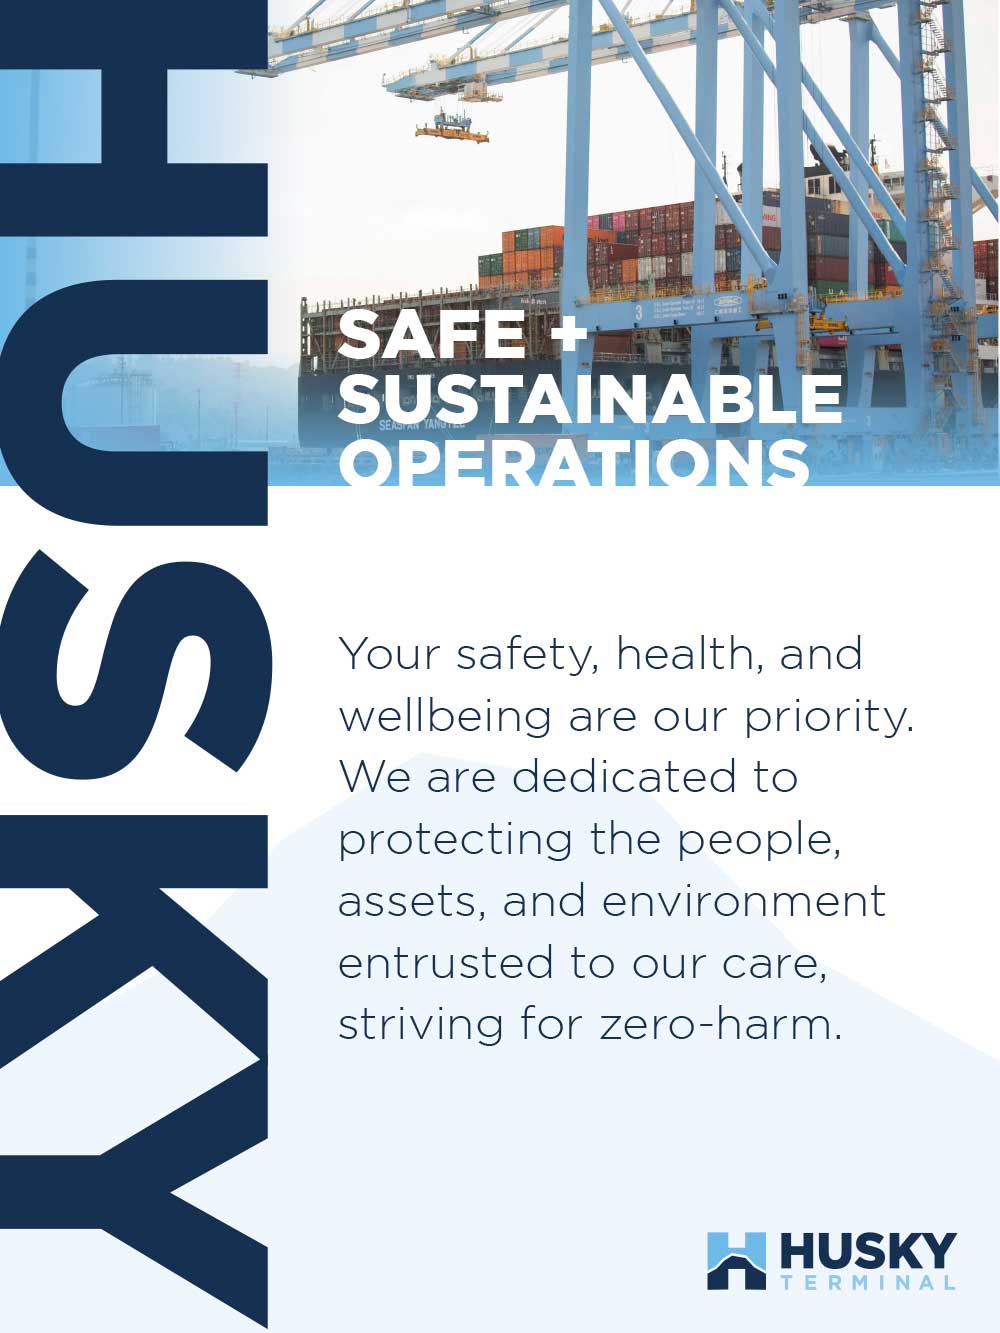 Value poster: Sustainable Operations